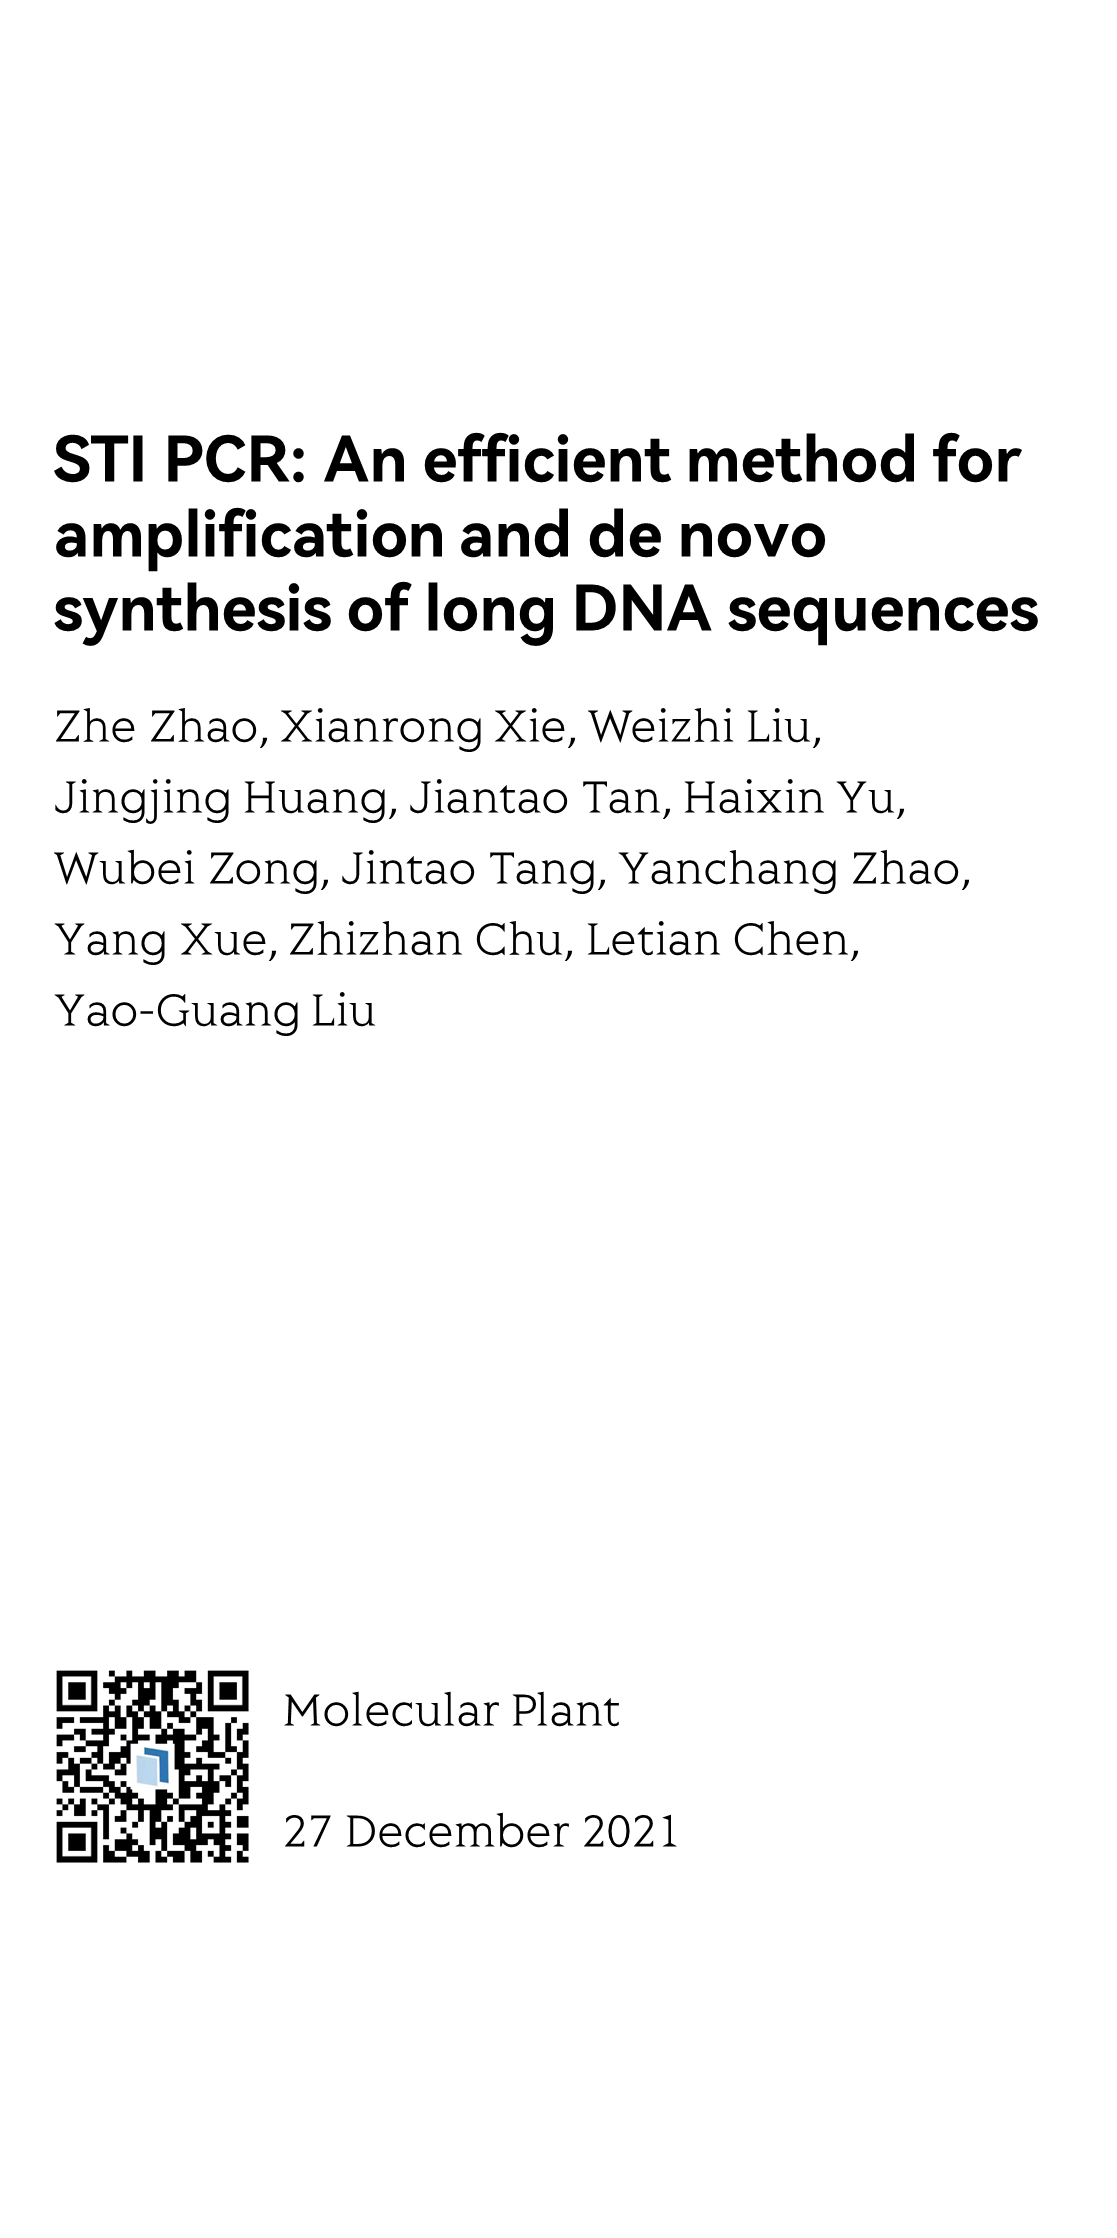 STI PCR: An efficient method for amplification and de novo synthesis of long DNA sequences_1